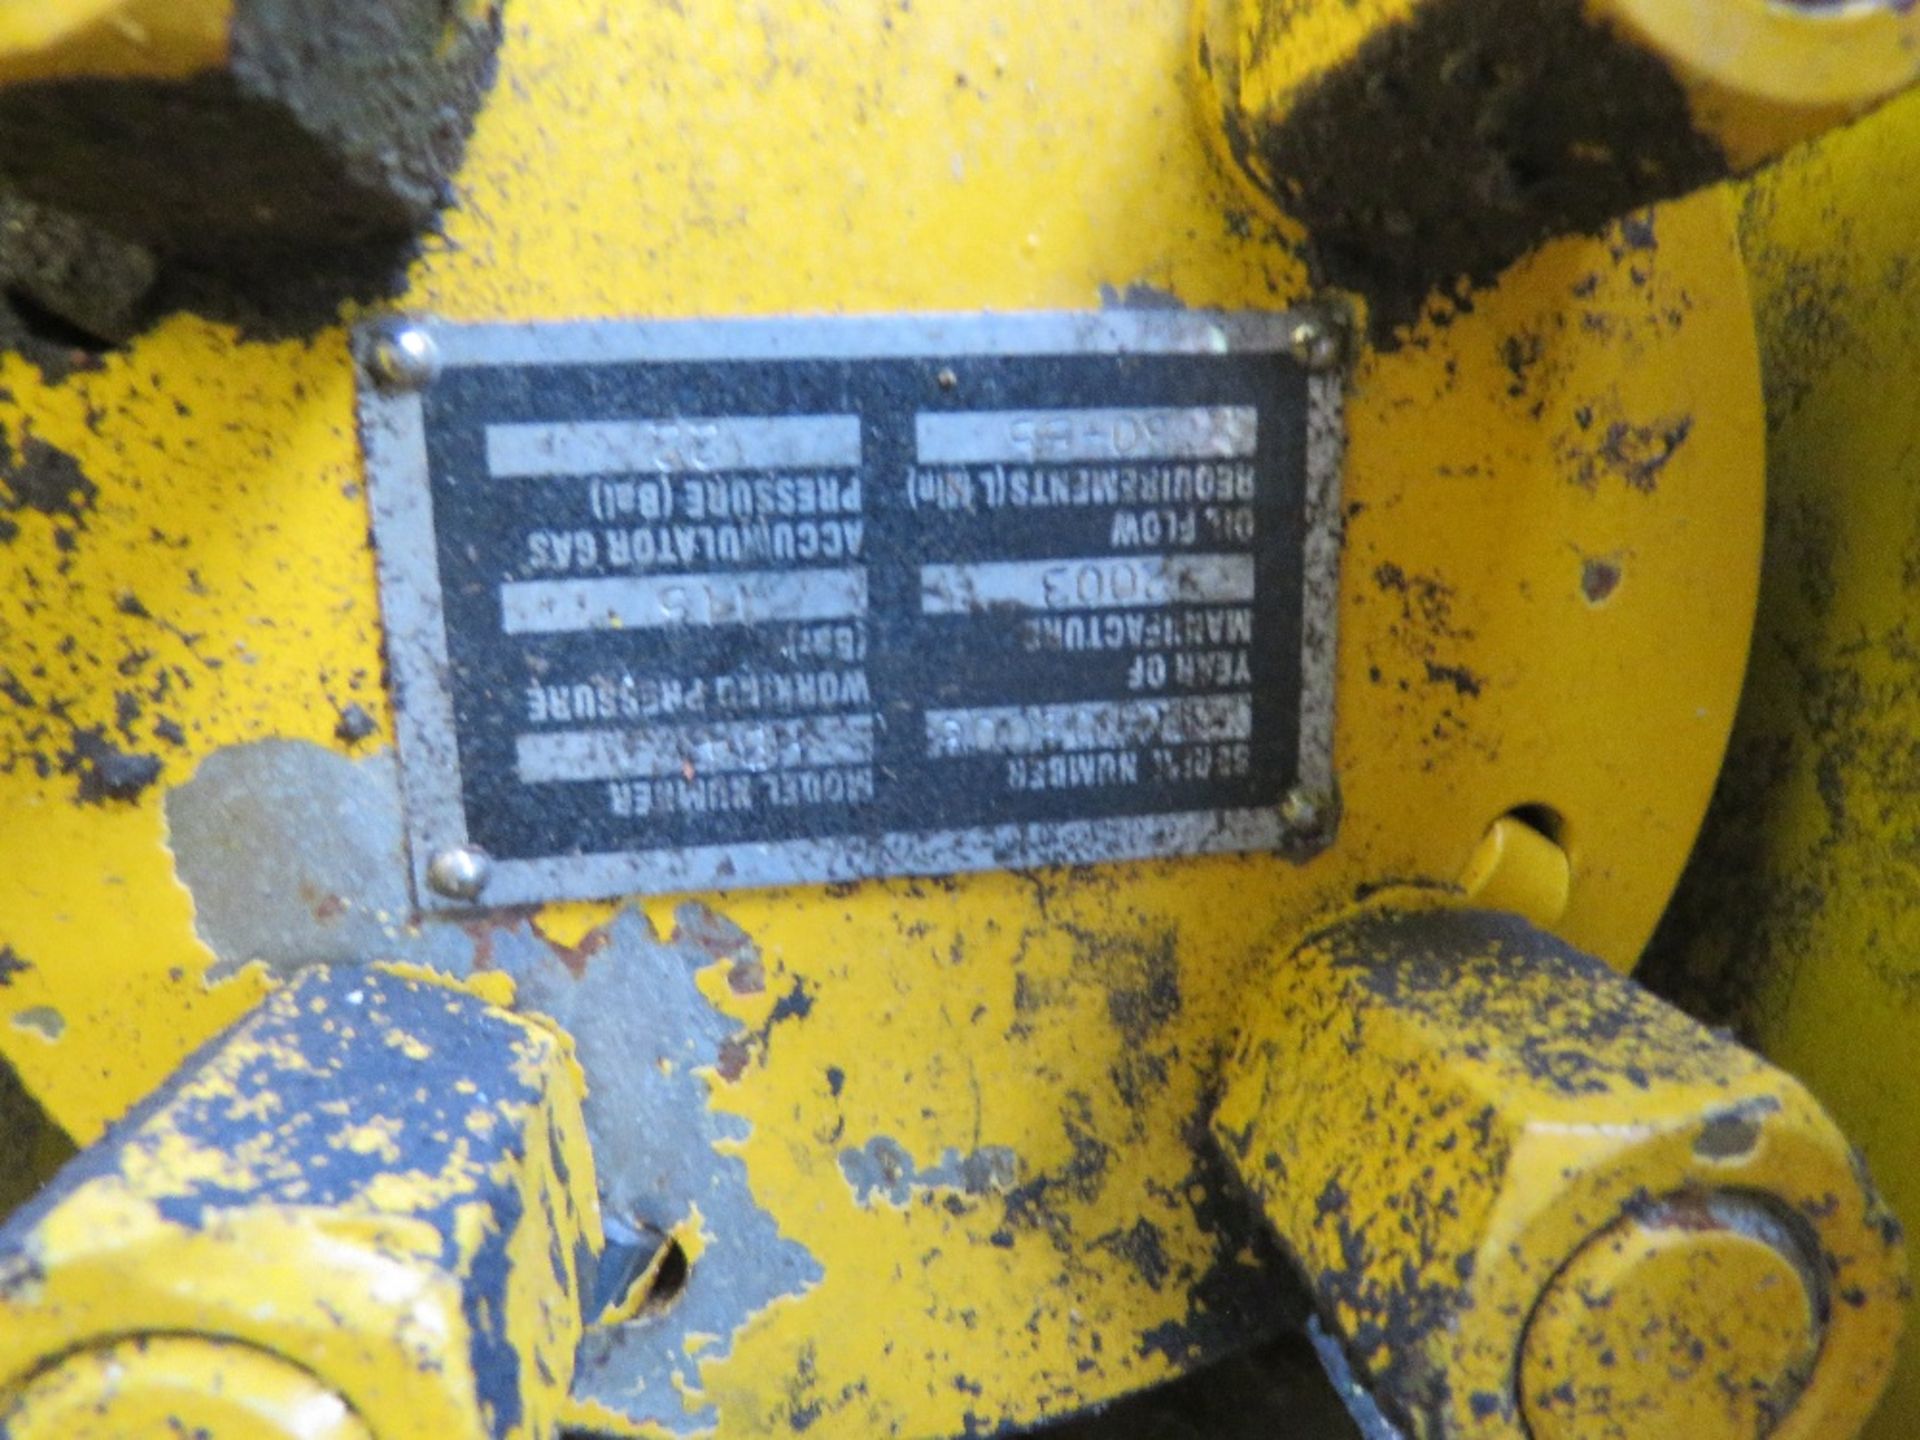 ARROWHEAD CONTRACTOR 4T EXCAVATOR MOUNTED BREAKER ON 45MM PINS. HAS DONE VERY LITTLE WORK, BELIEVED - Image 4 of 4